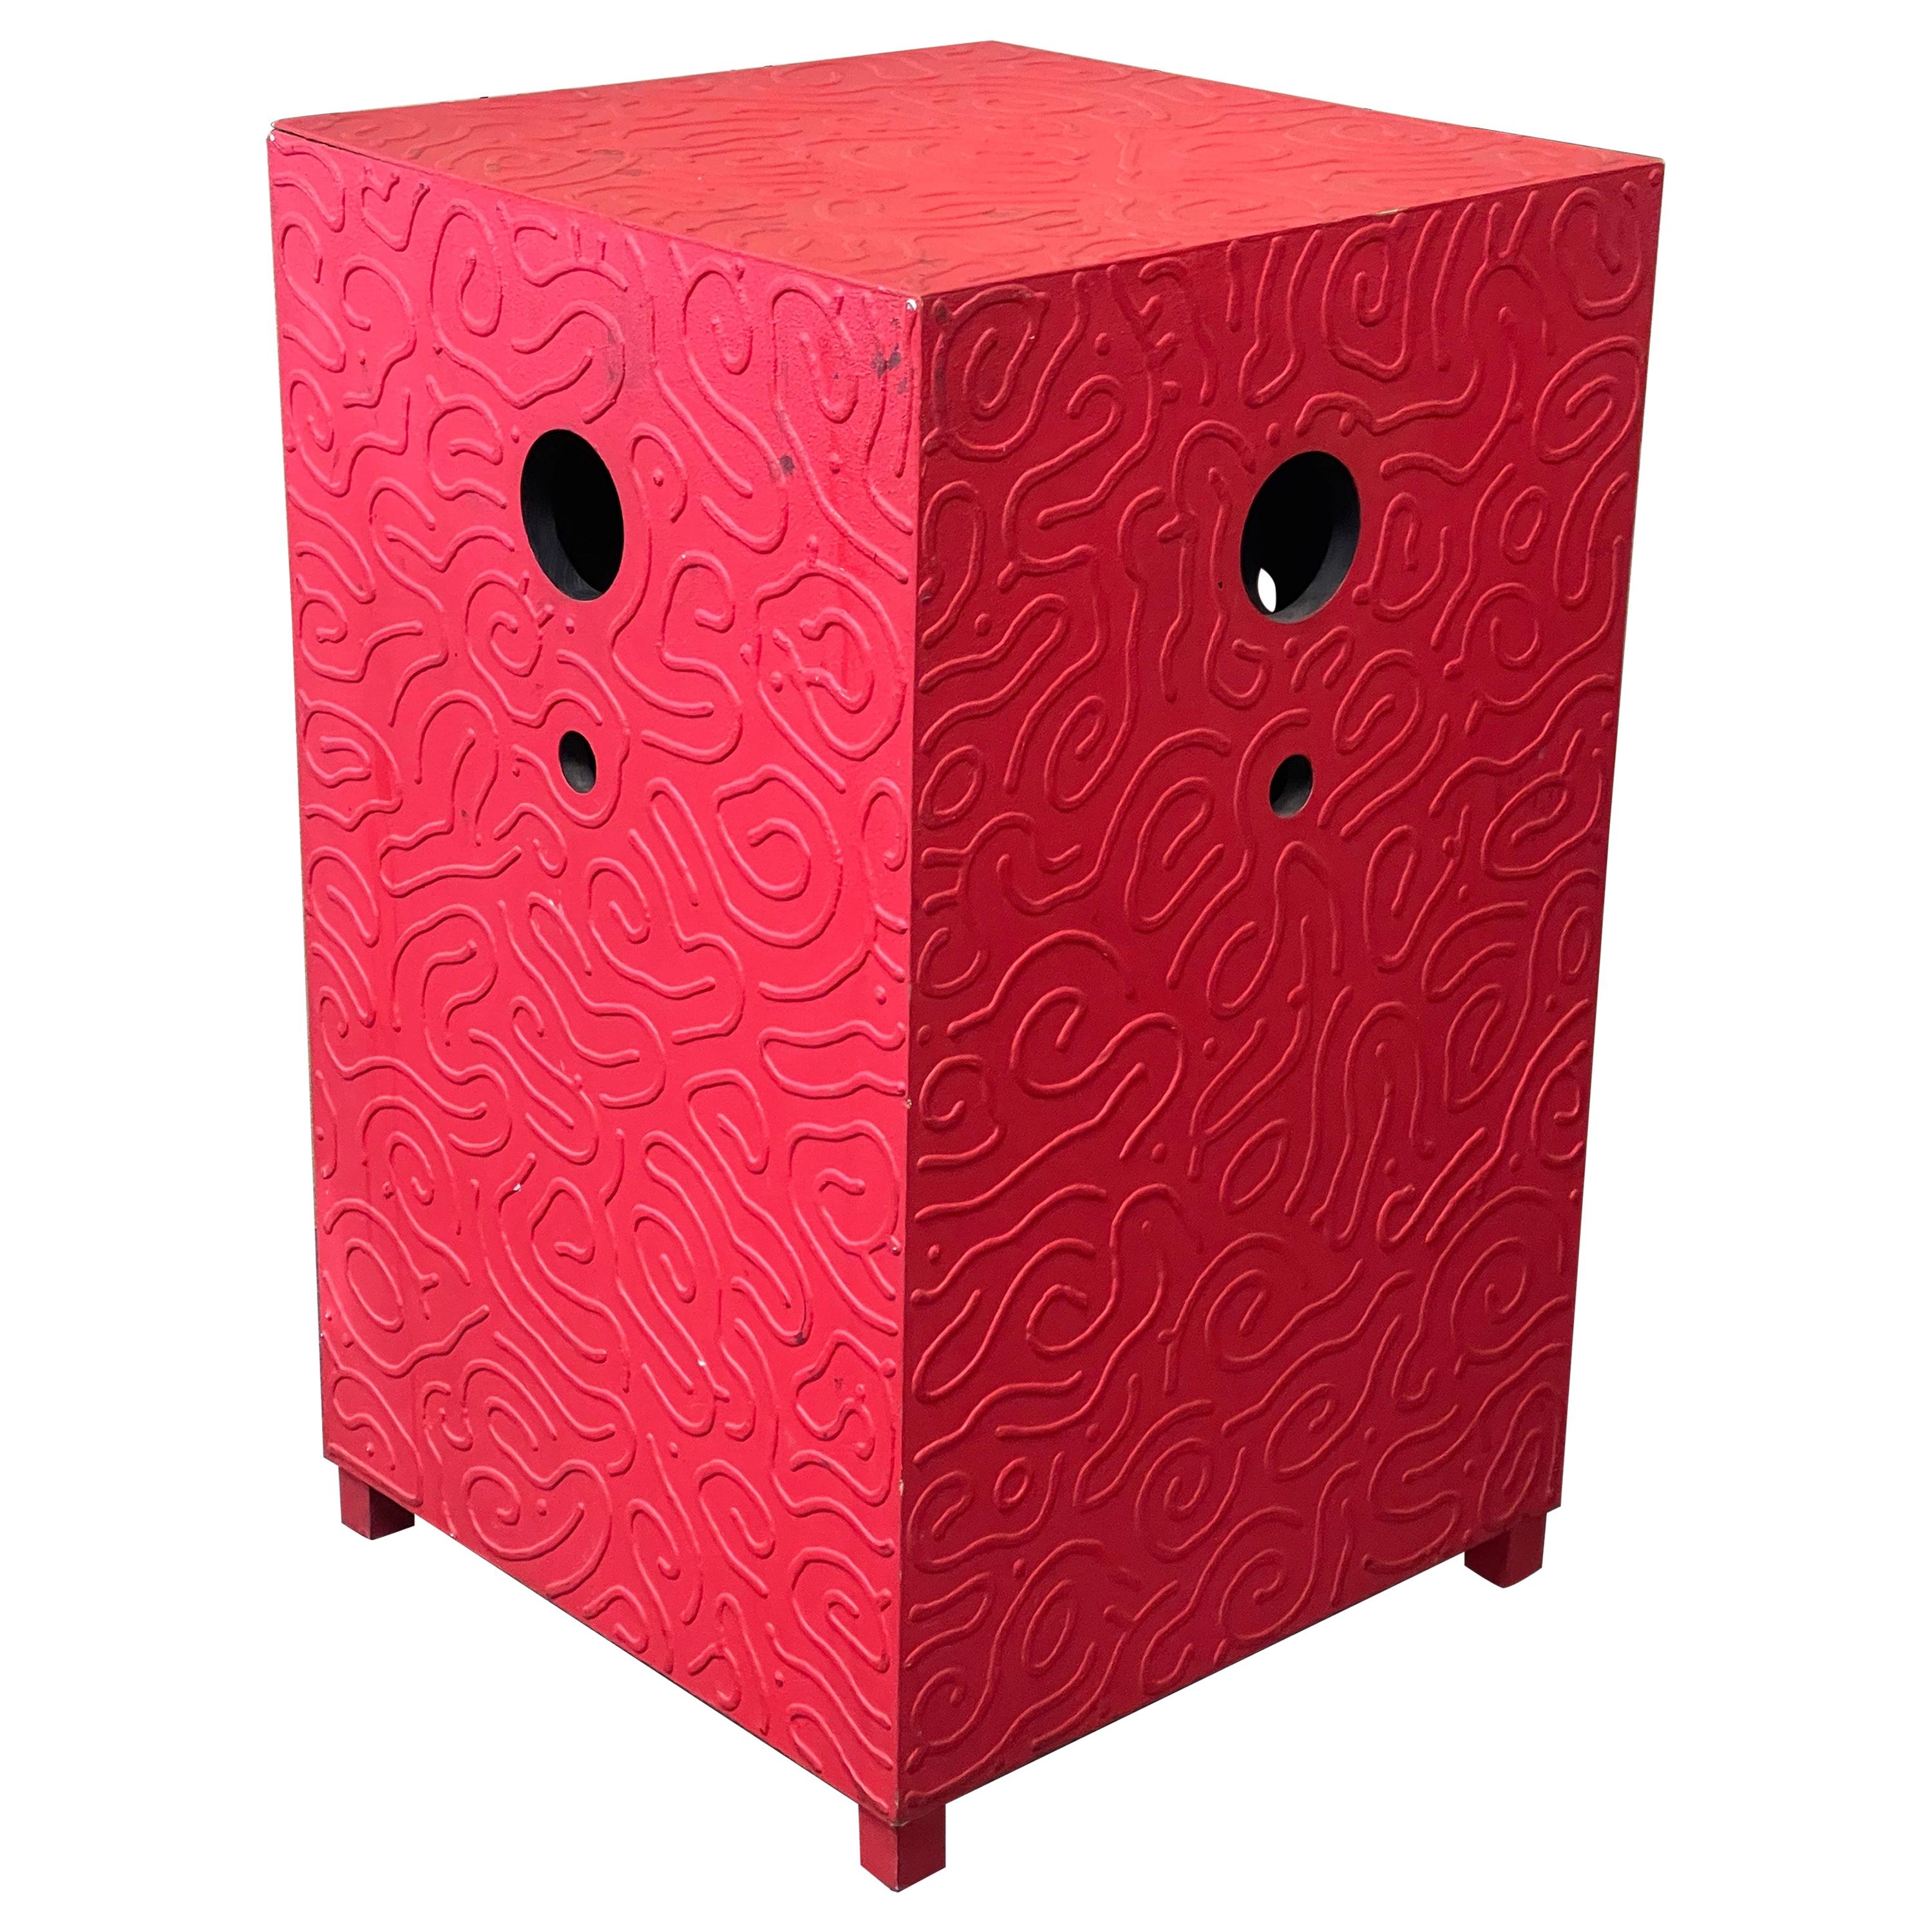 "Red Tower" Box Sculpture by Artist Andy Lakey